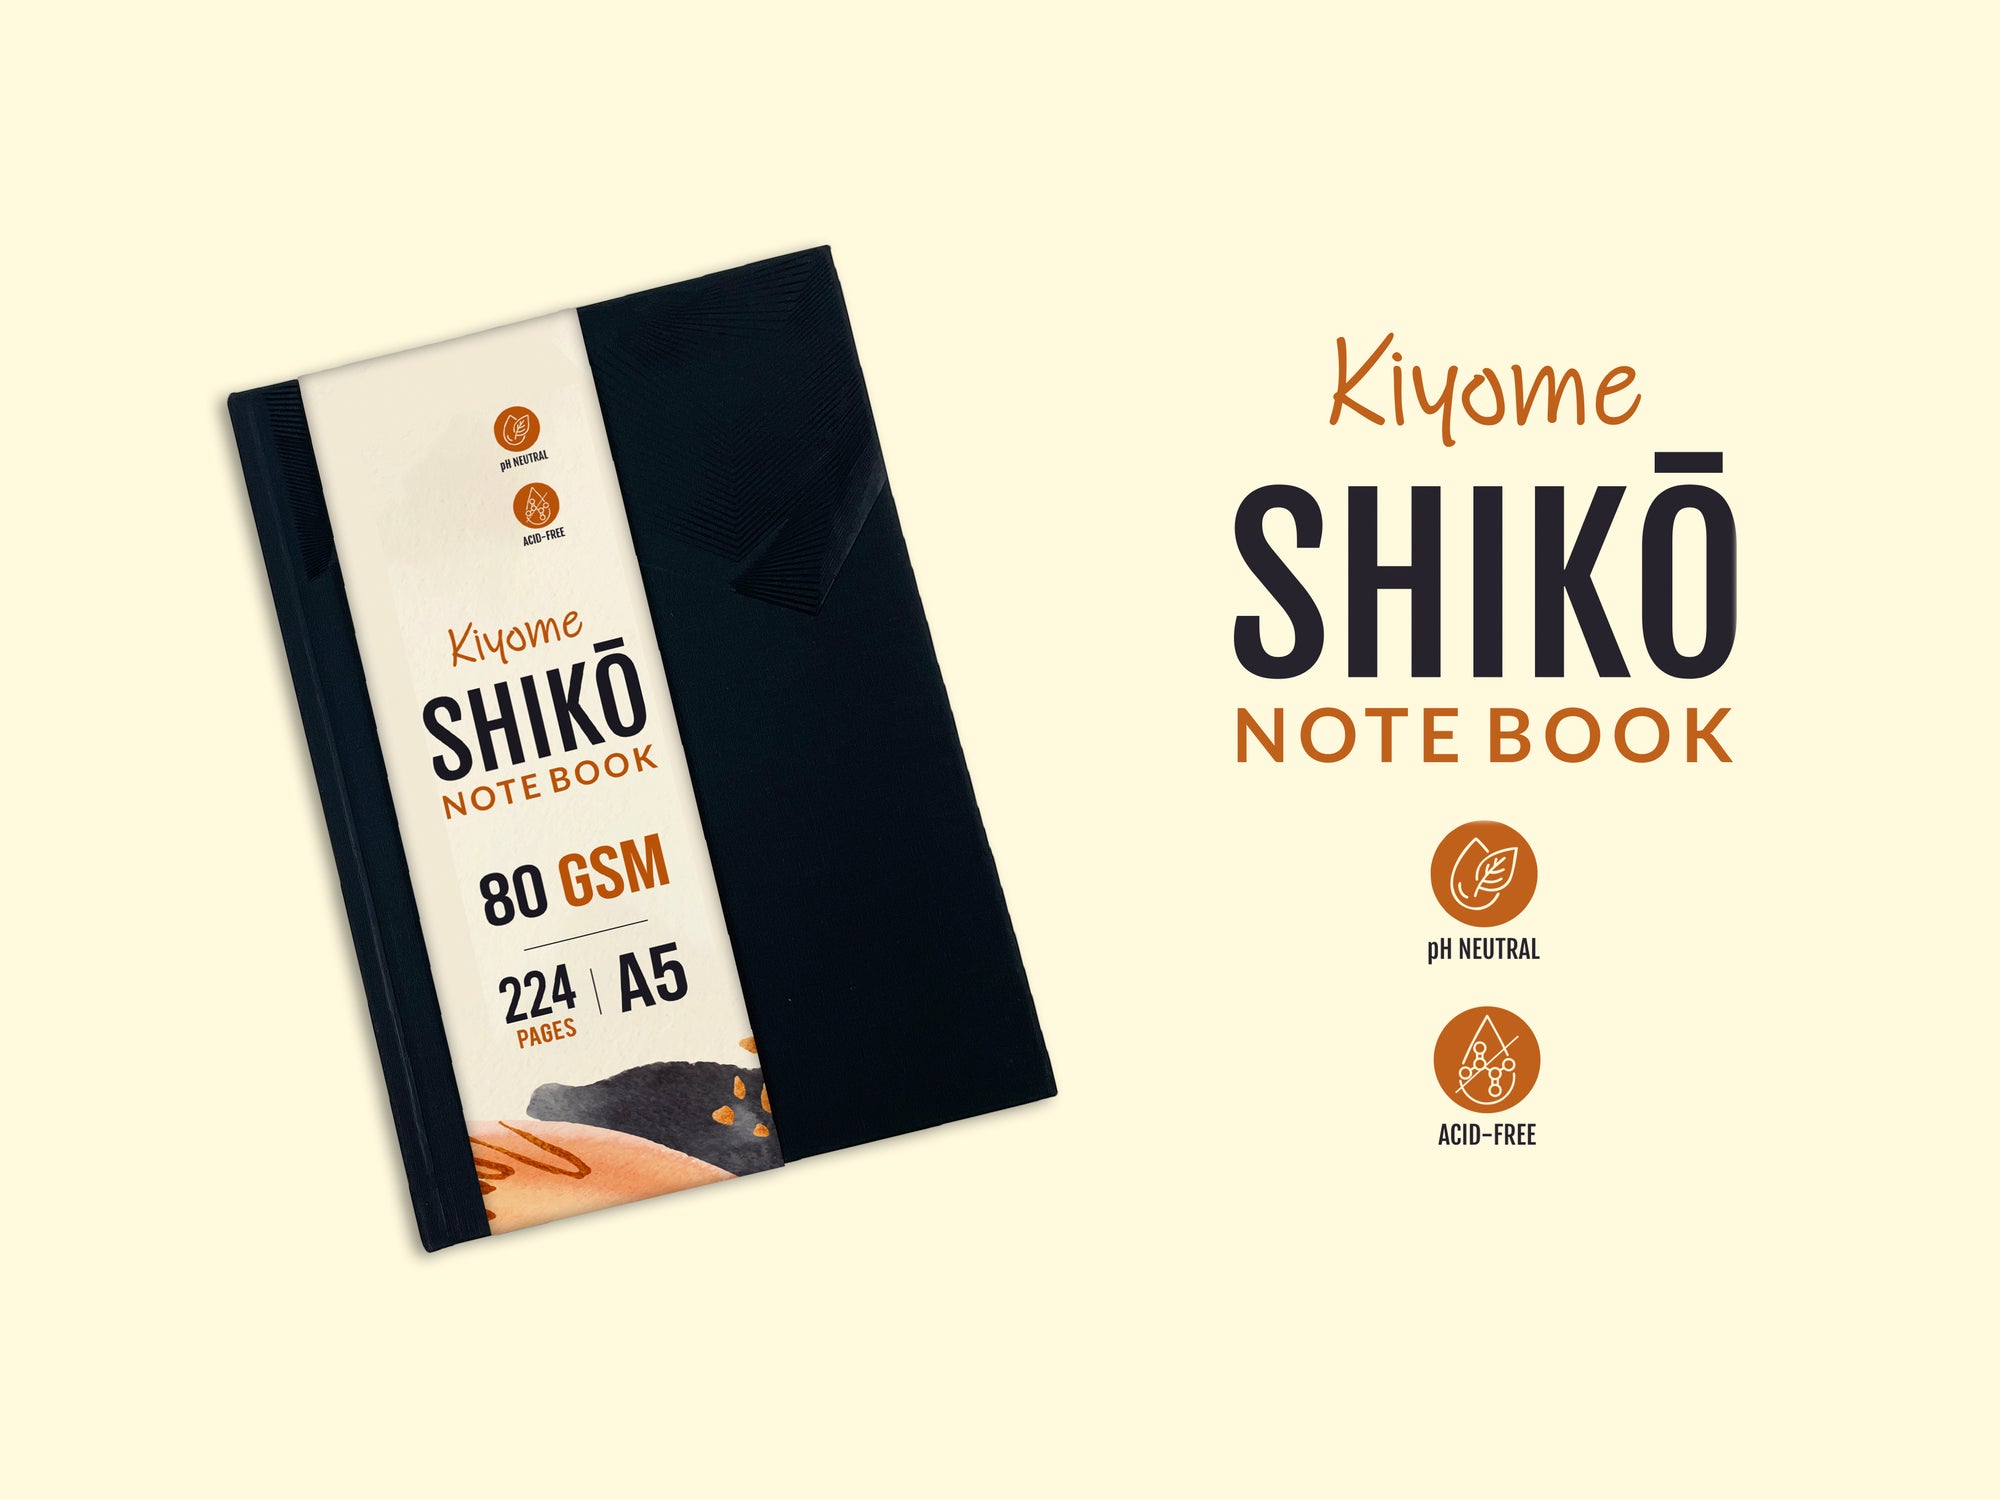 Kiyome SHIKO Notebook | Linen Textured Cover | 80 GSM | A5 | 224 Ruled Pages